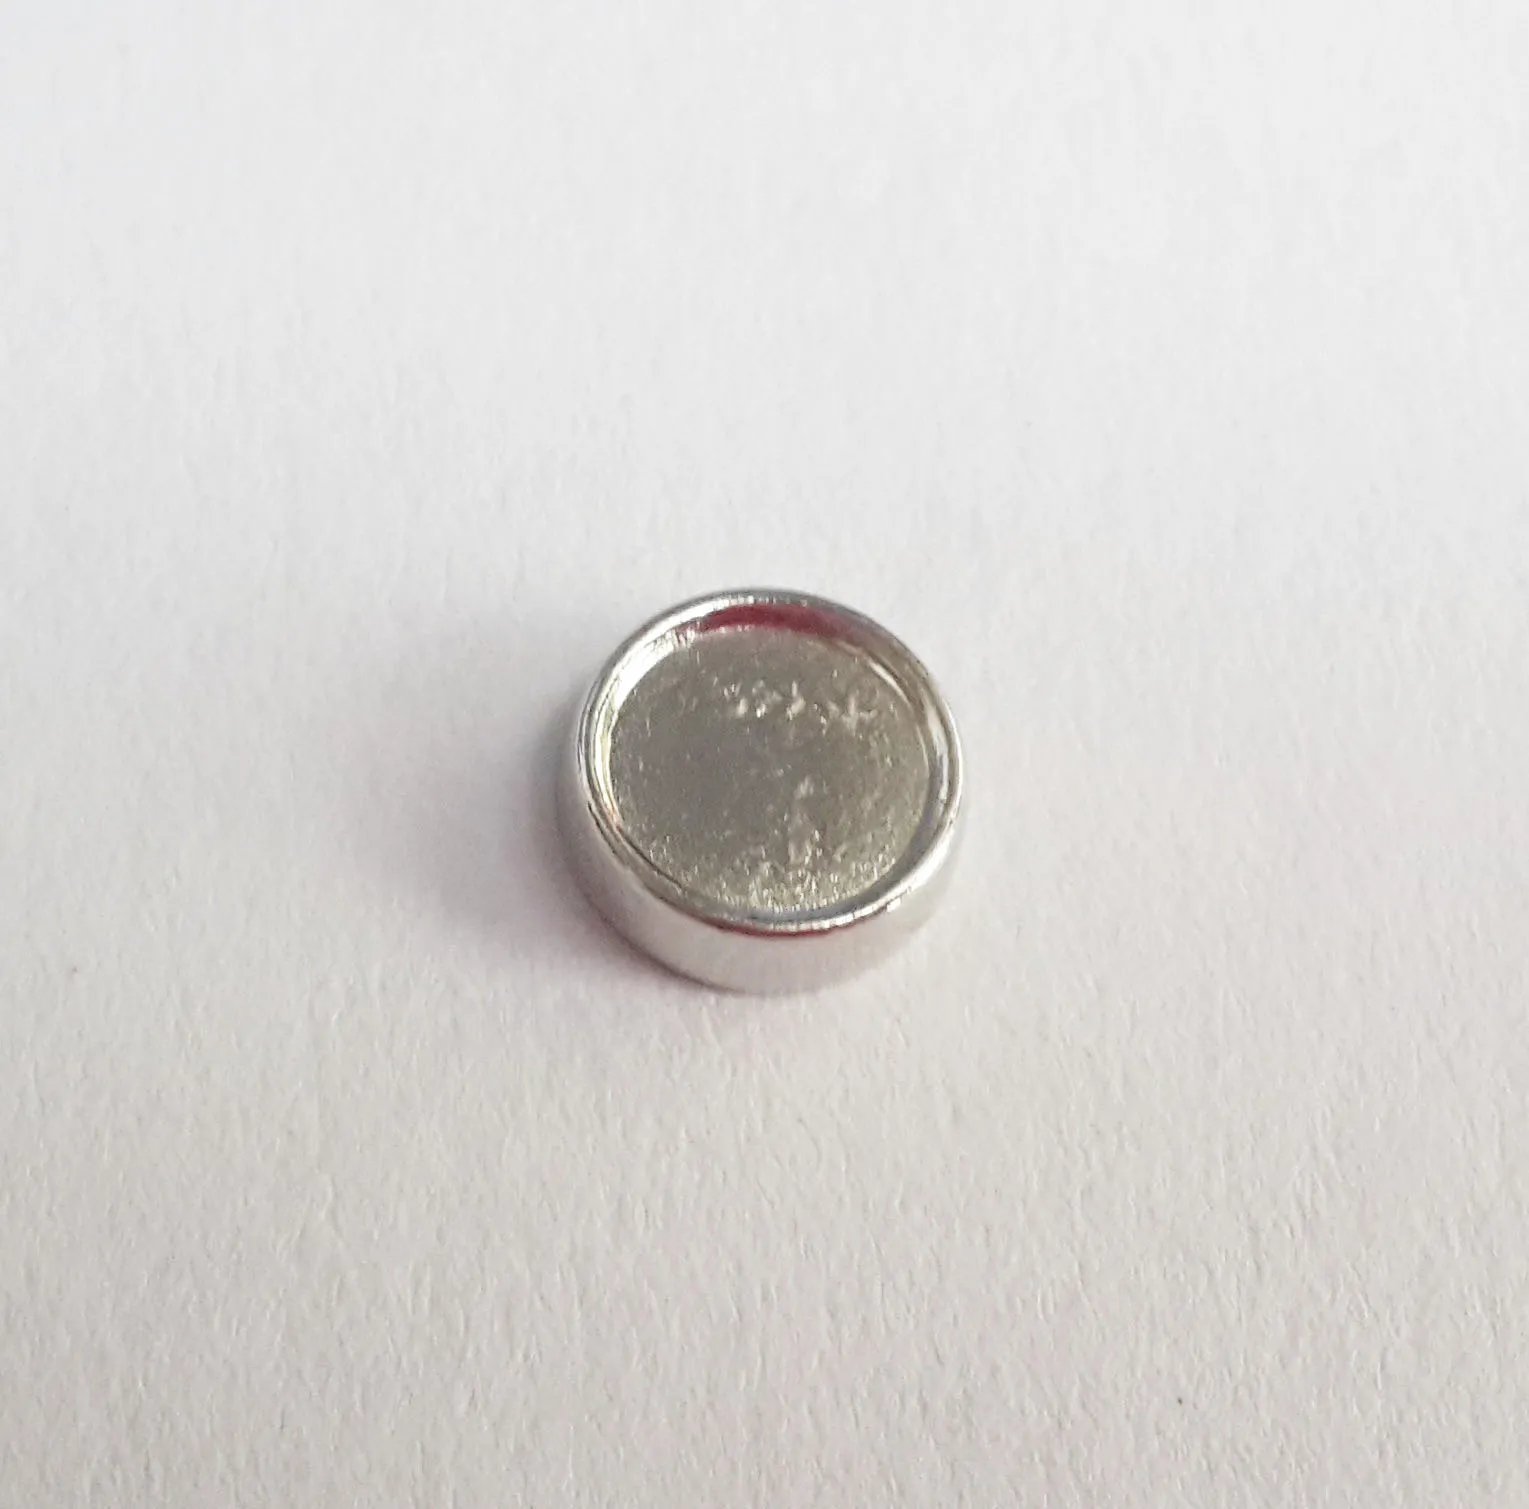 6mm inner/8mm outside diameter Silver circle setting Floating Charms for Glass Living Locket DIY blank photo Charm fit Locket